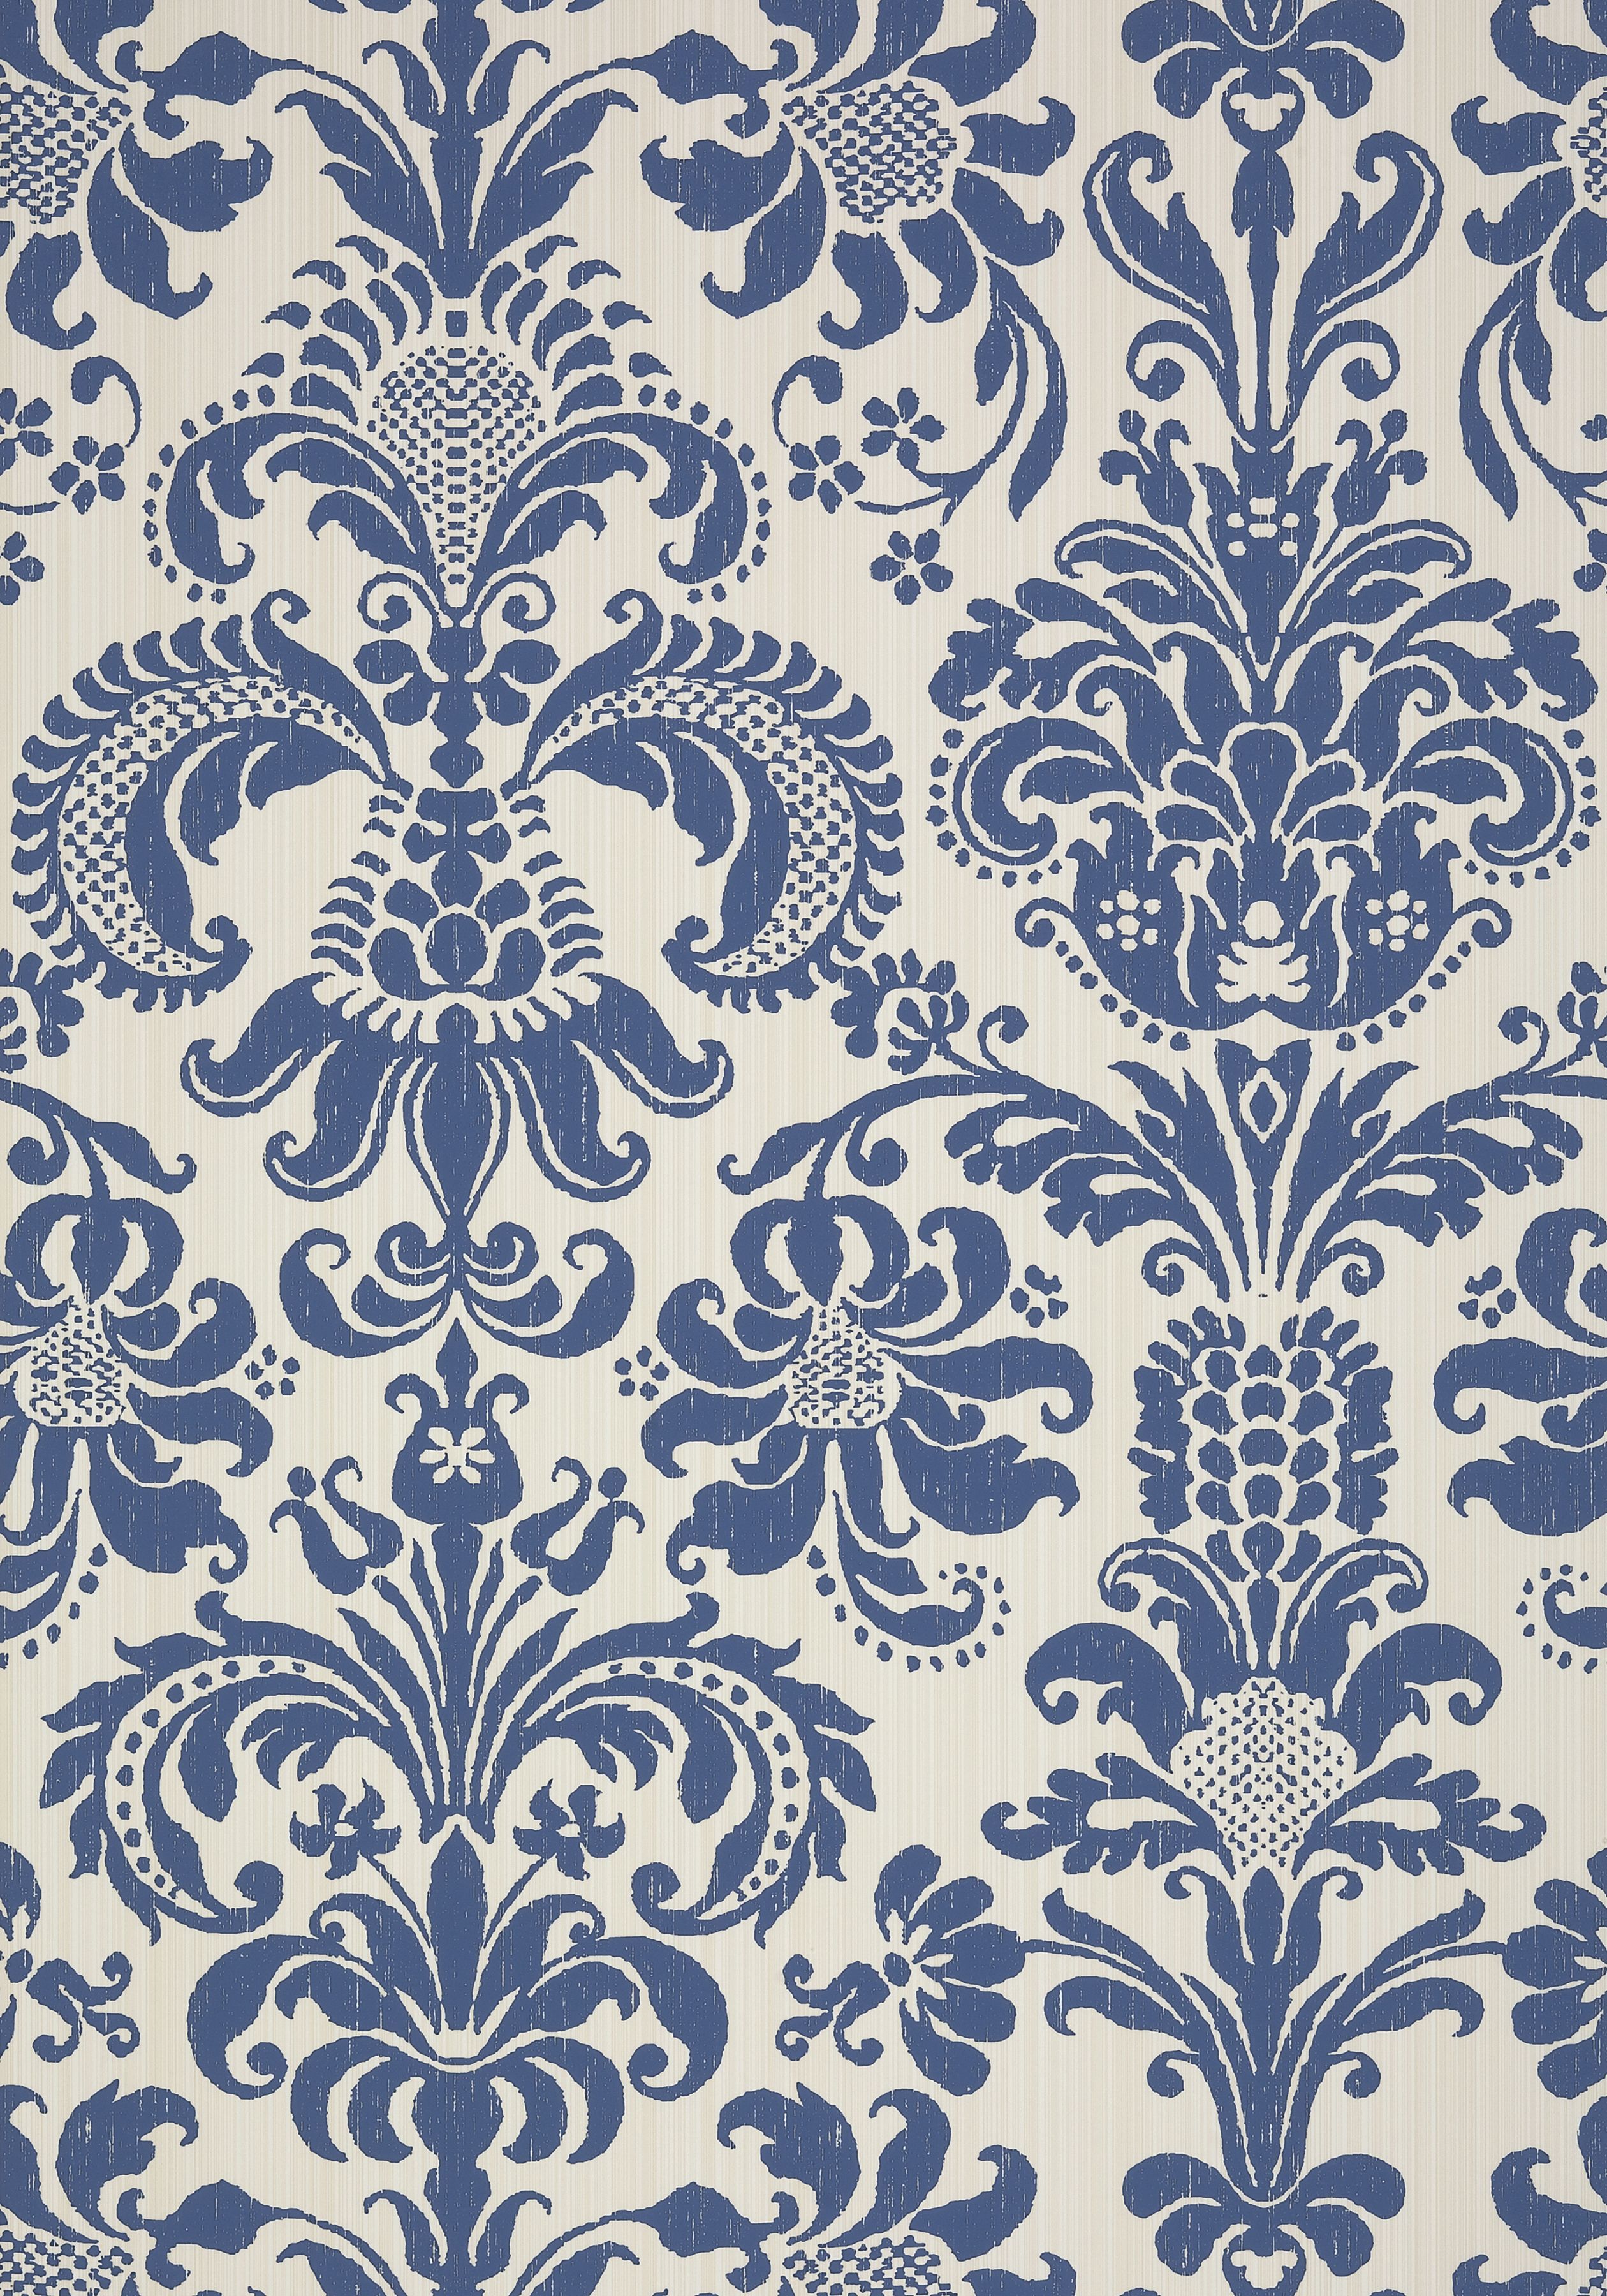 Navy Blue and White Wallpaper Free Navy Blue and White Background